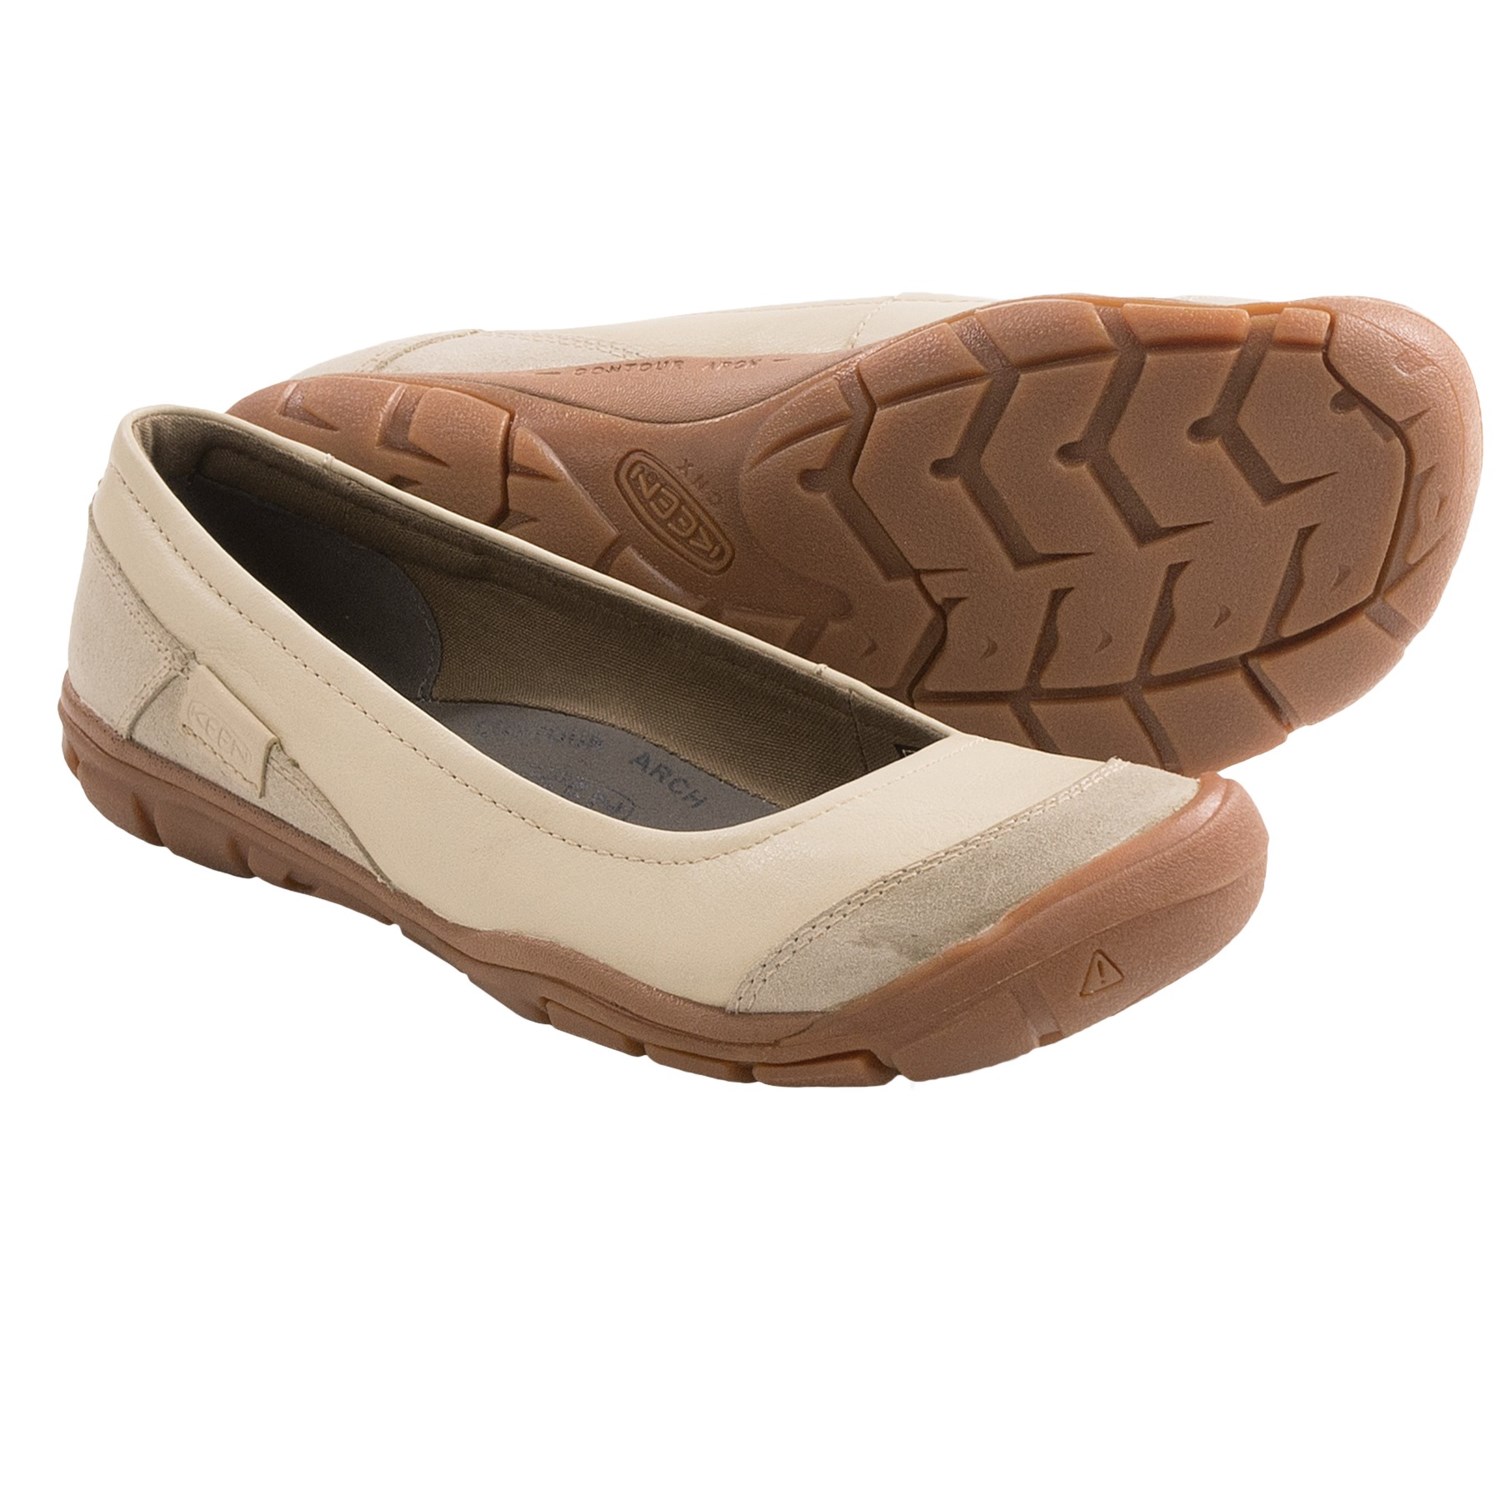 Keen Rivington Ballerina CNX Shoes - Leather (For Women) in Pumice ...